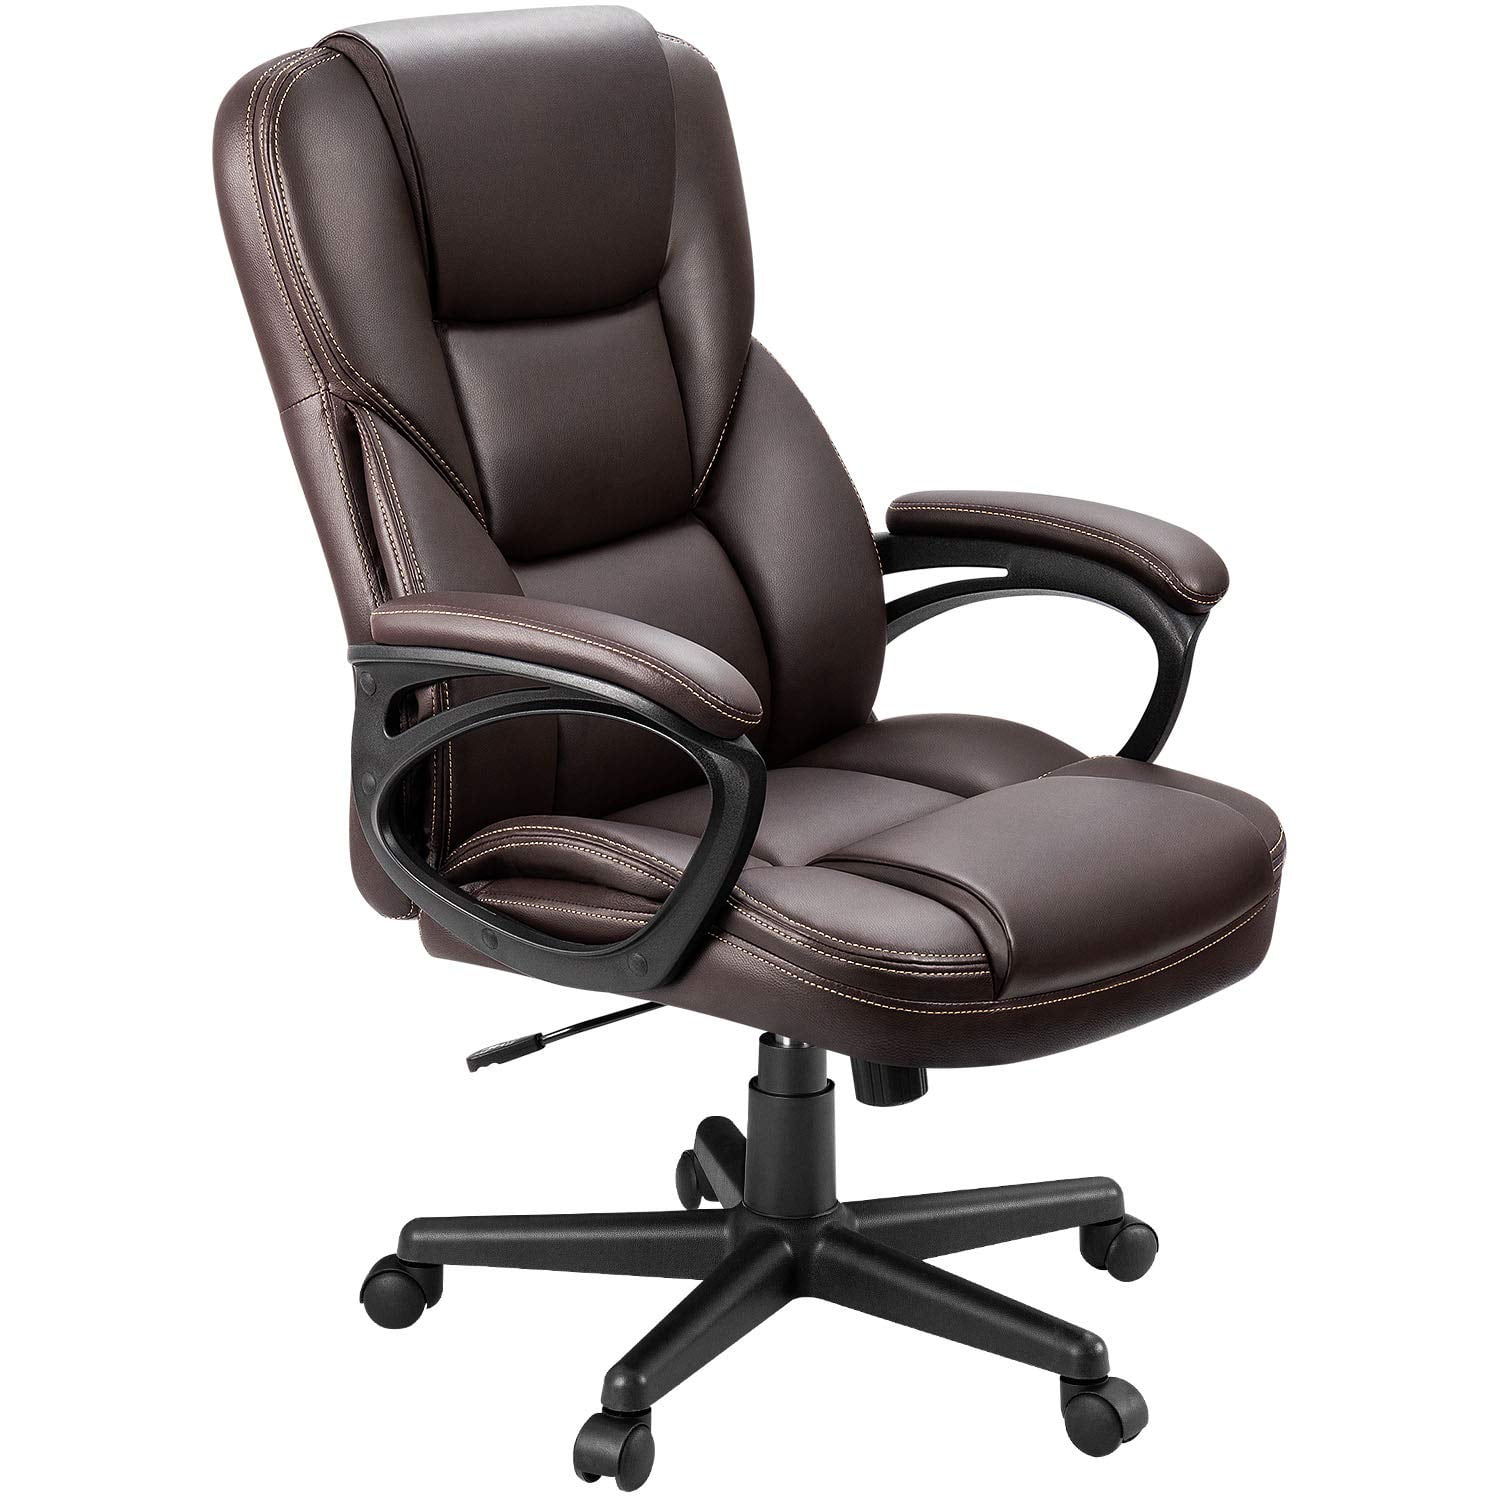 Walnew Business Office Furniture High Back Exectuive